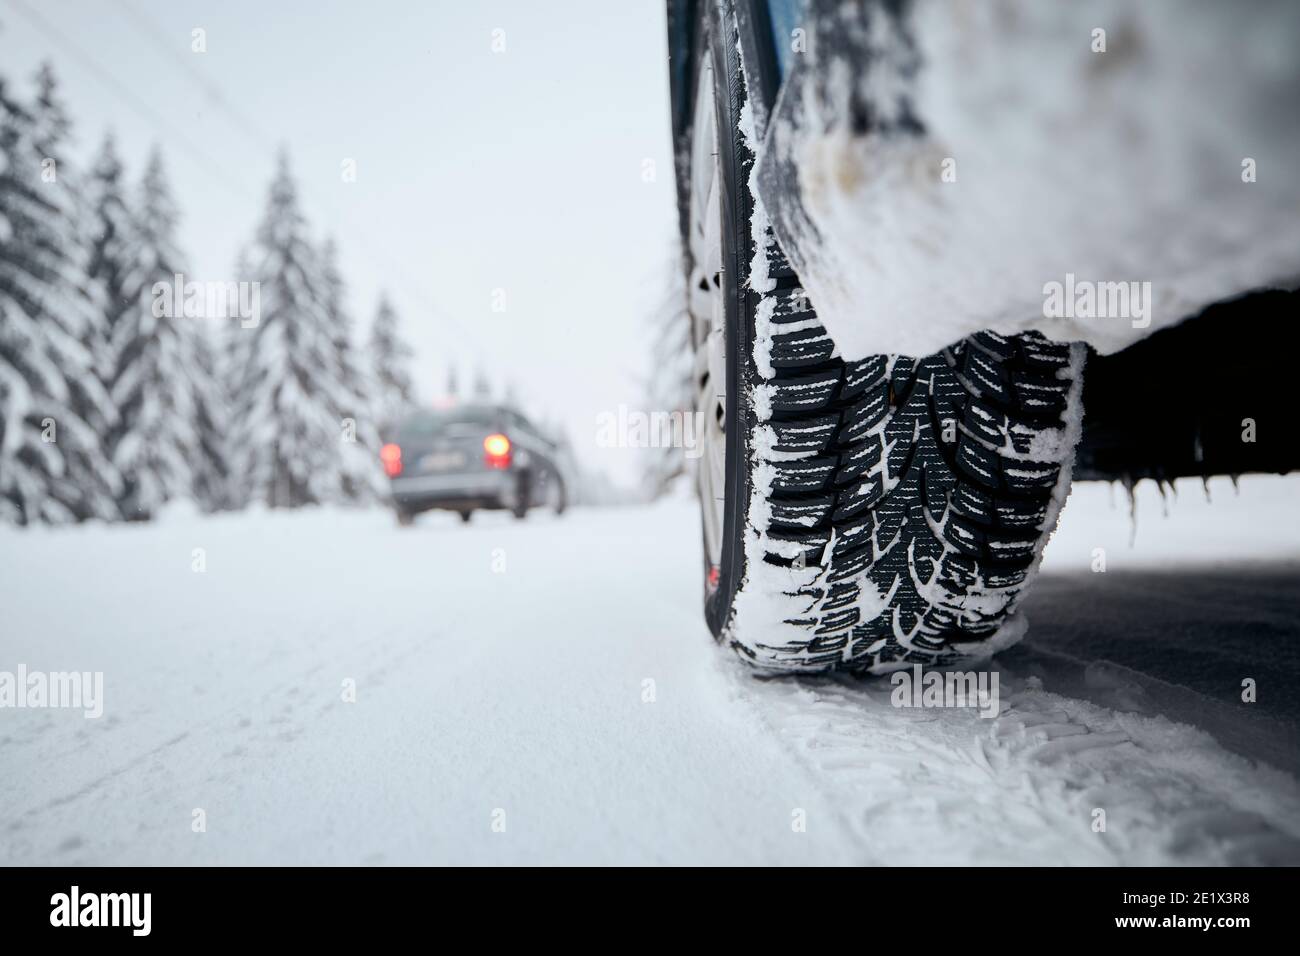 Close-up view of tire of car on snow covered and icy road. Themes safety and driving in winter. Stock Photo